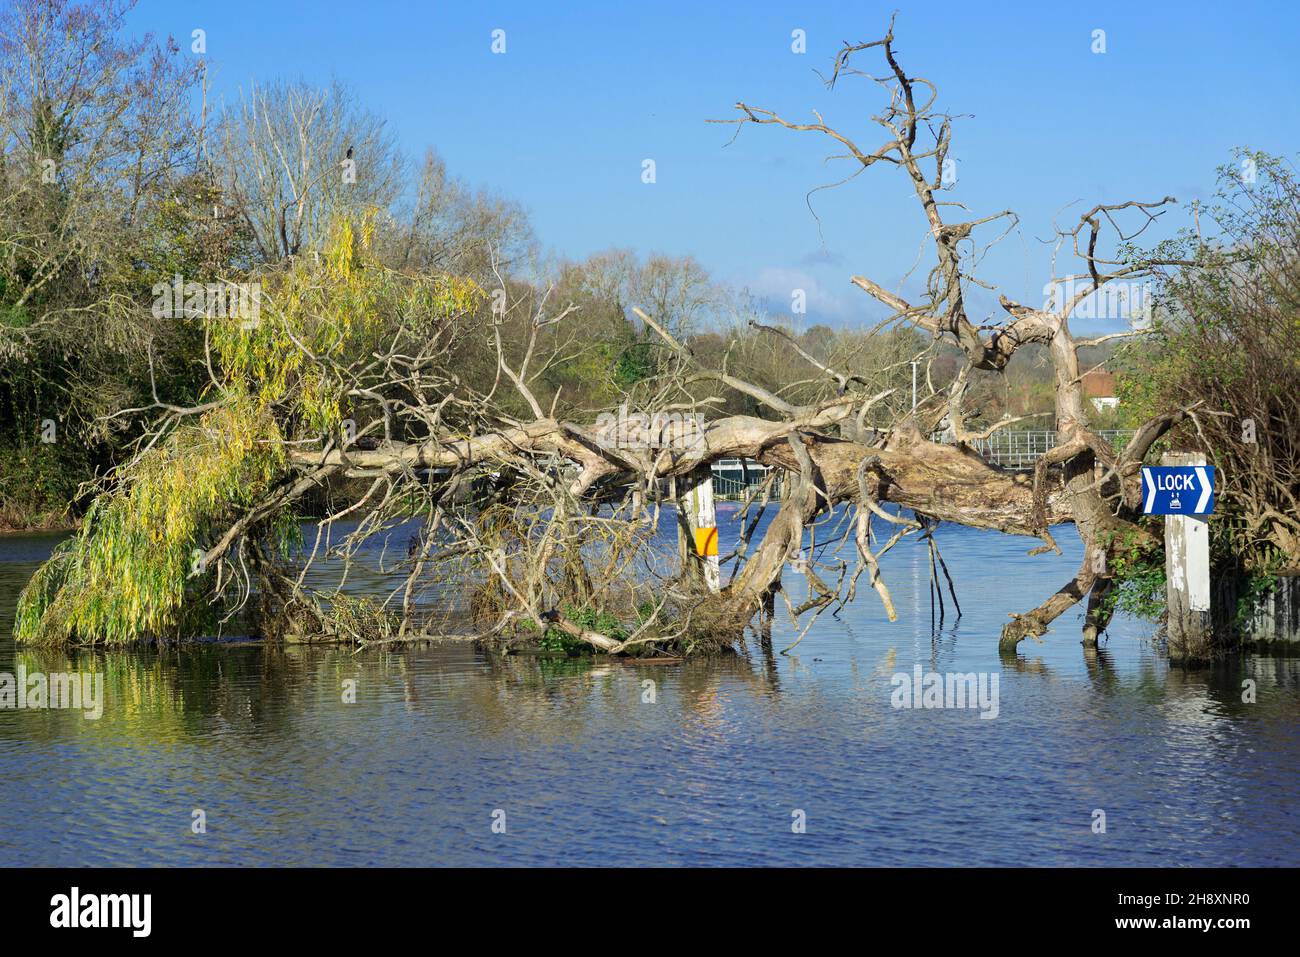 Fallen tree obstructing part of the River Thames, at Sonning-on-Thames, Berkshire, England, UK Stock Photo